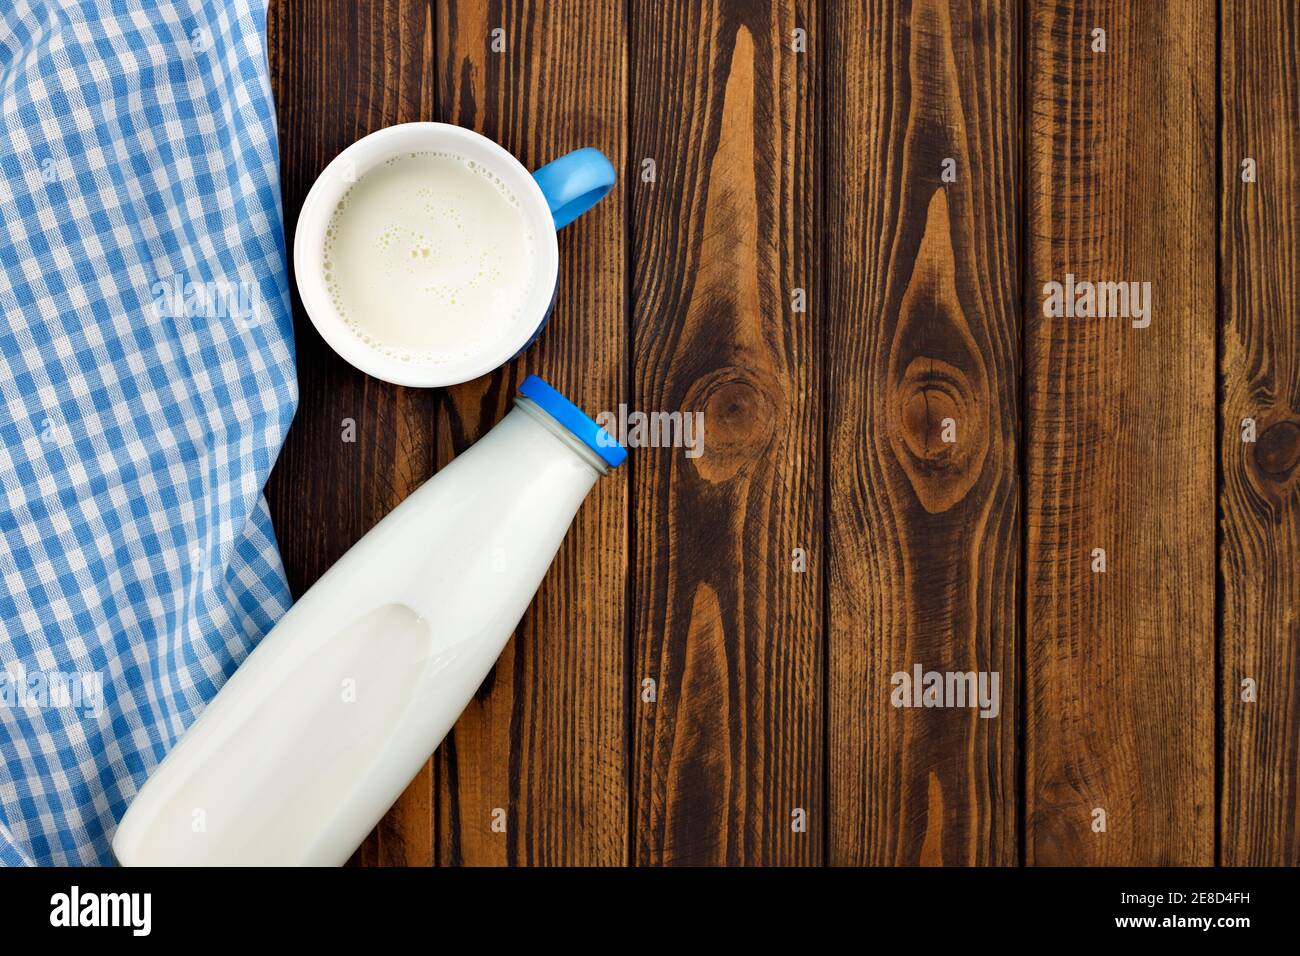 milk in glass bottle and cup Stock Photo